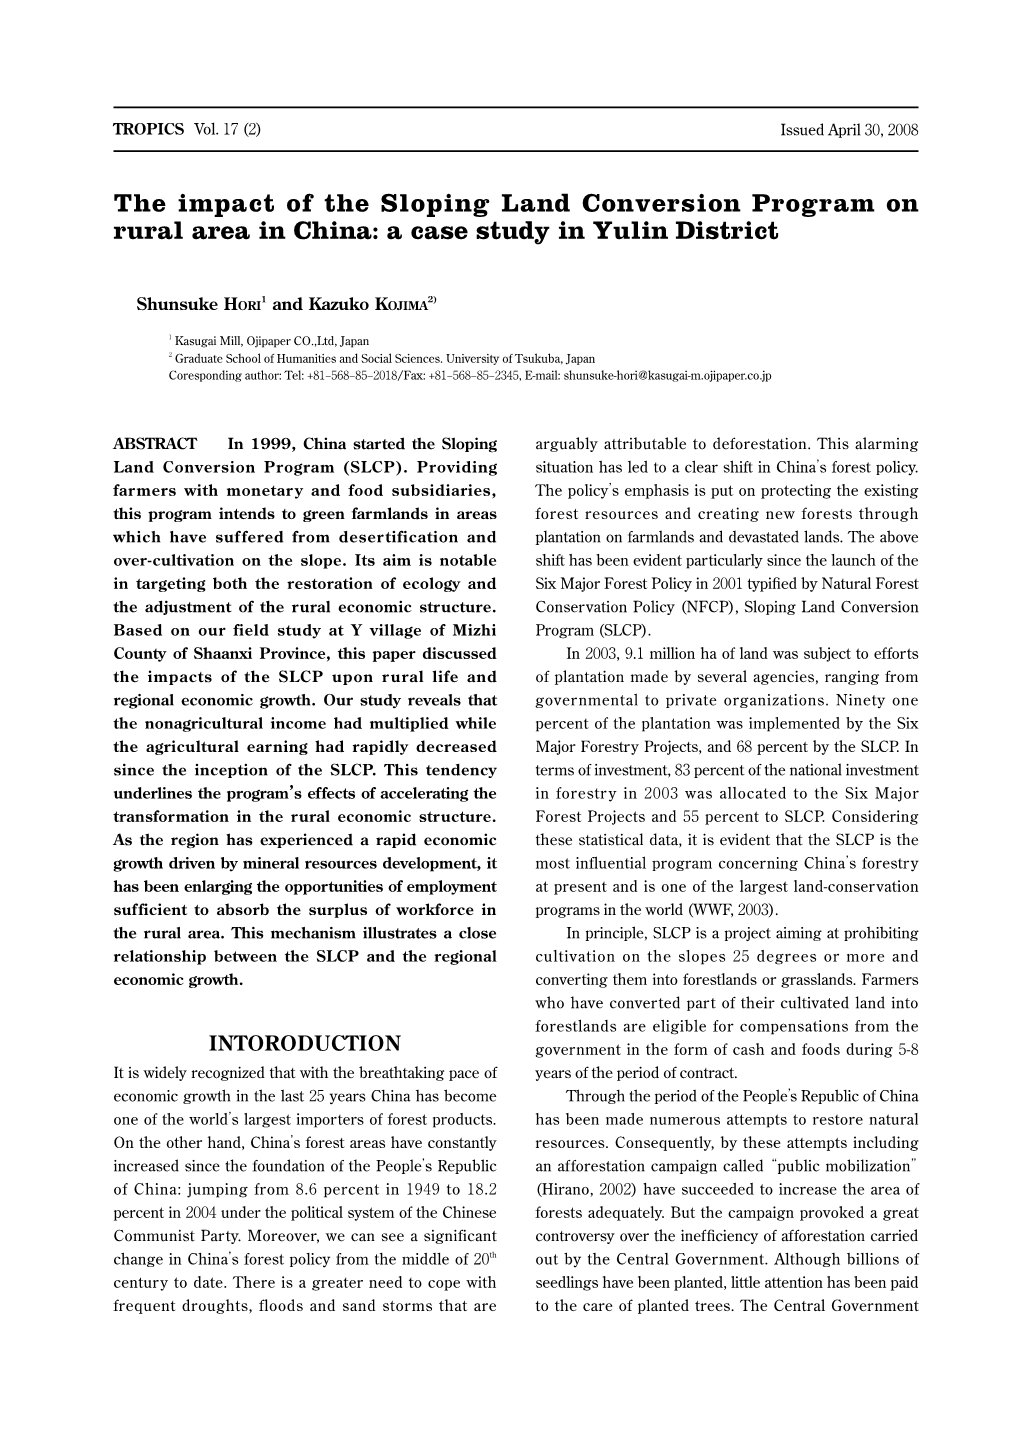 The Impact of the Sloping Land Conversion Program on Rural Area in China: a Case Study in Yulin District